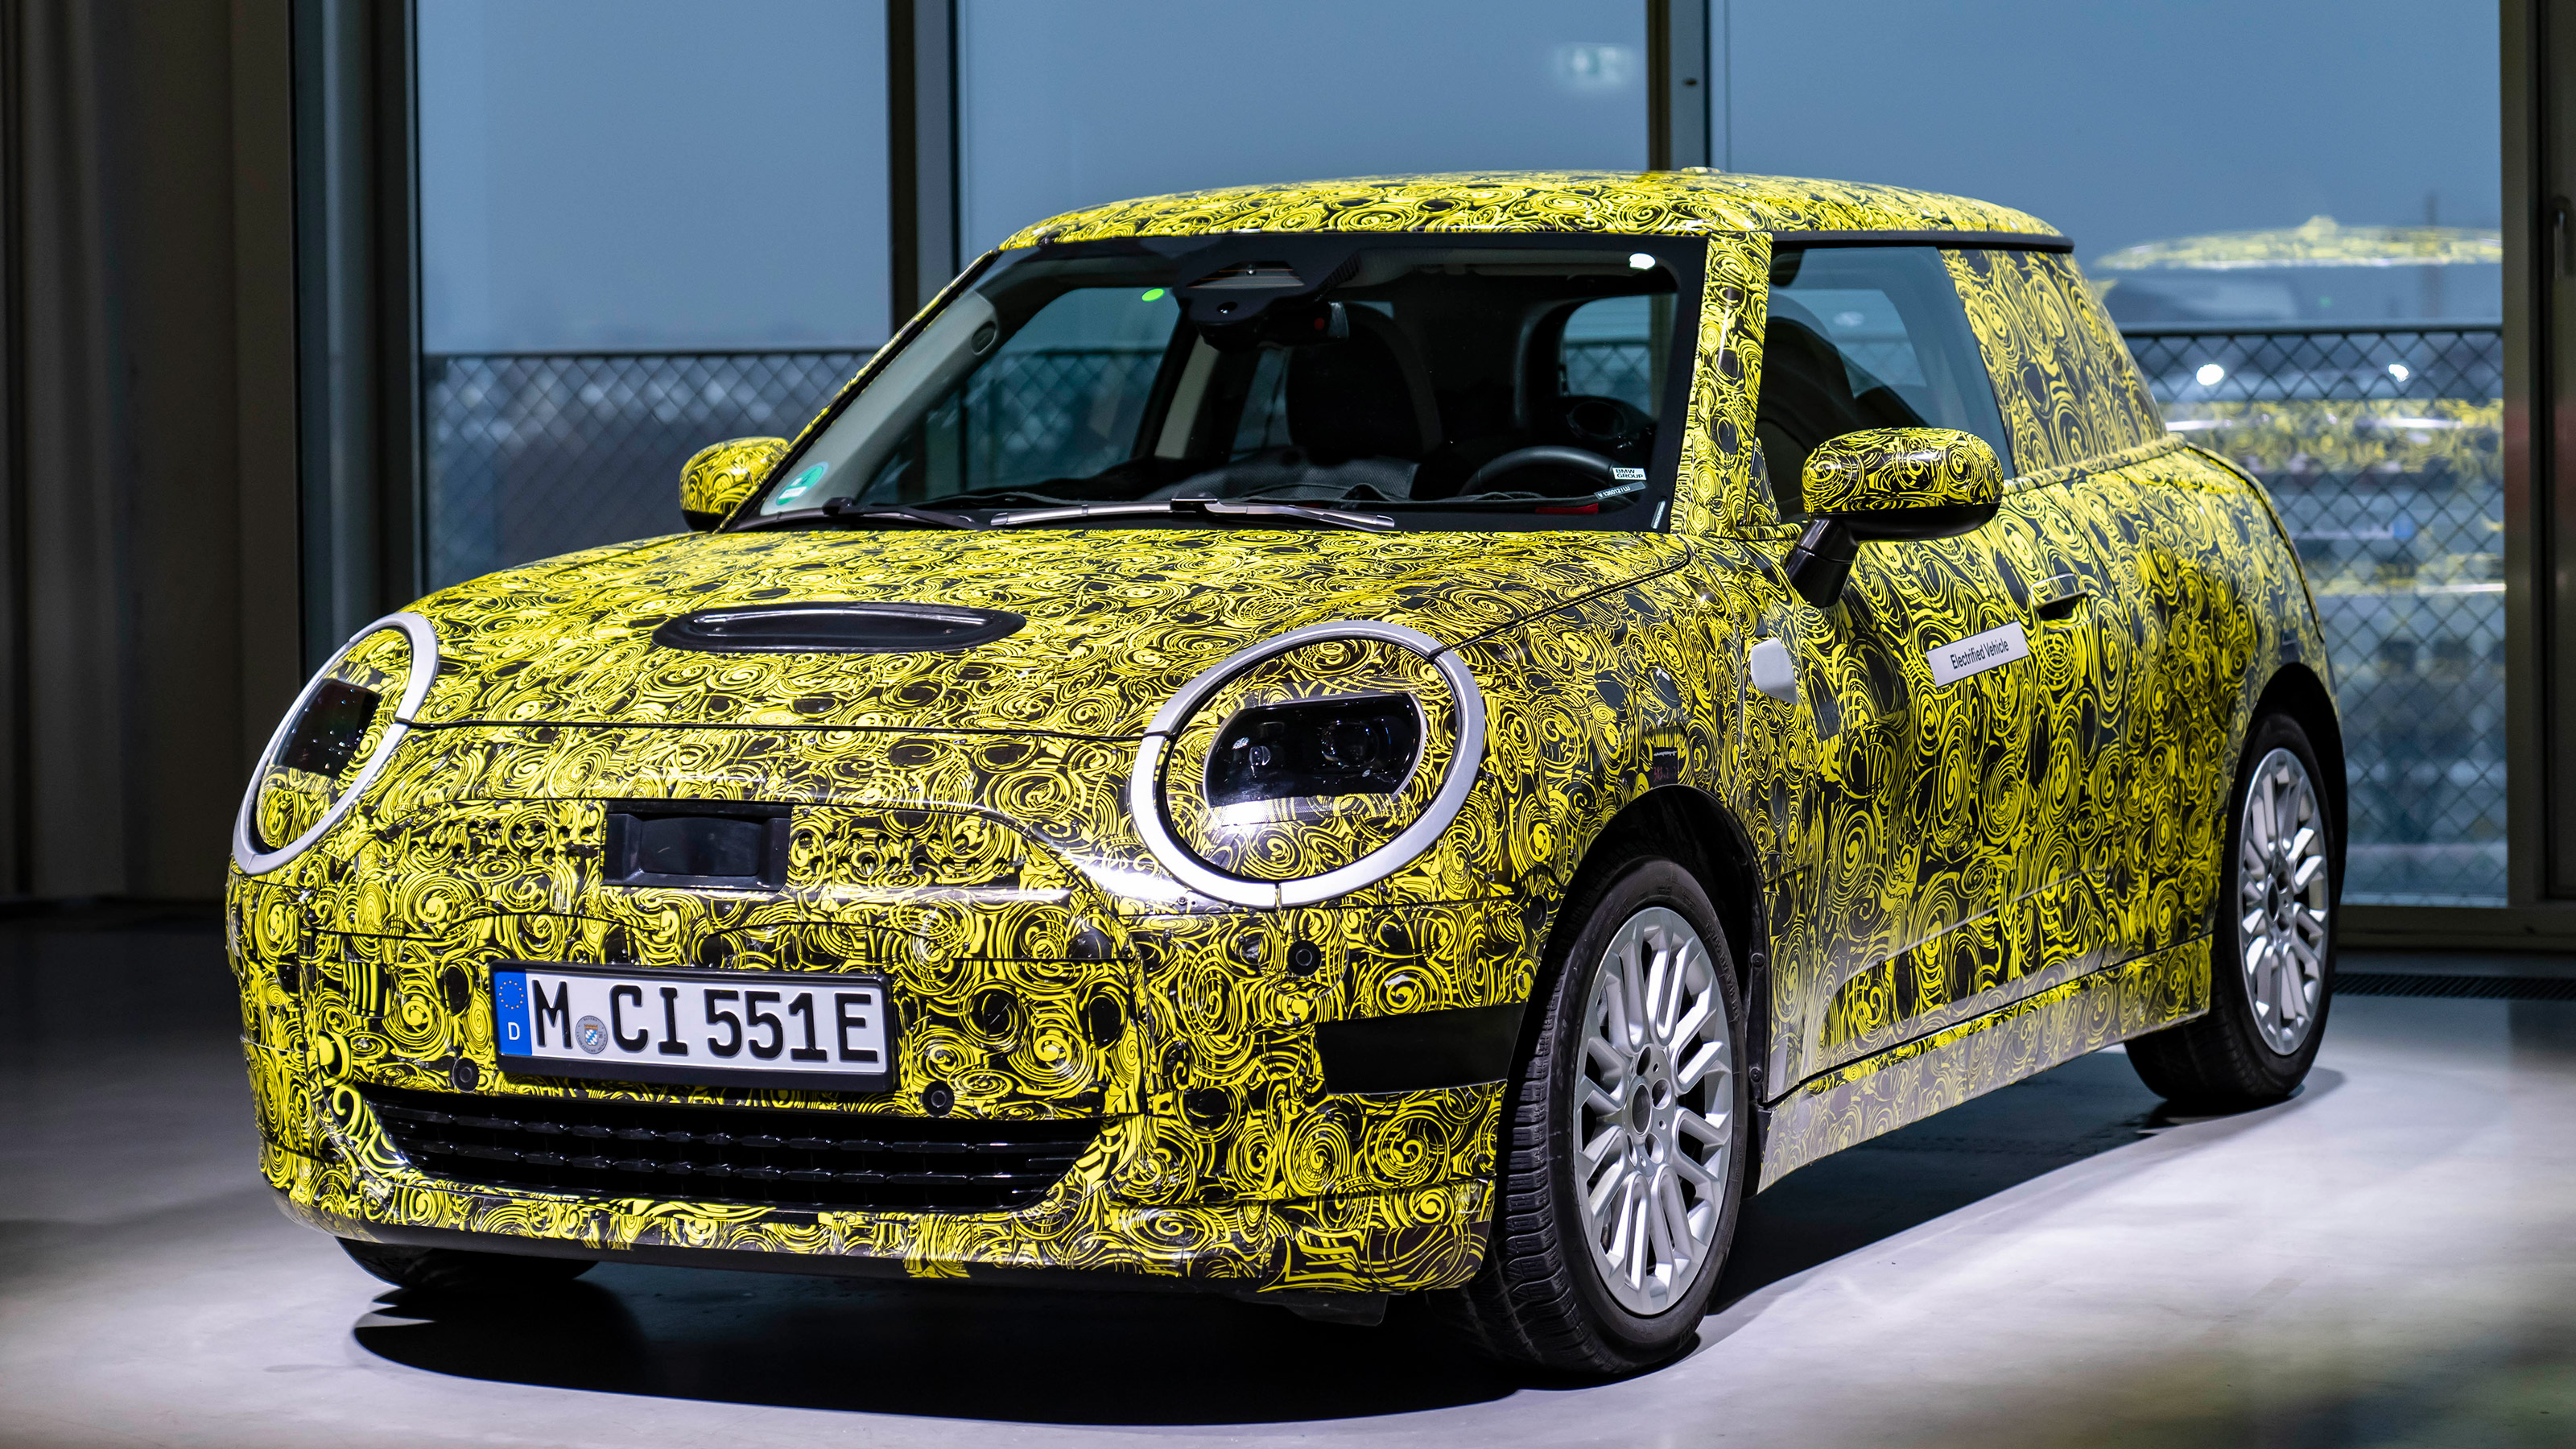 New electric MINI Cooper E to debut at Munich Motor Show 